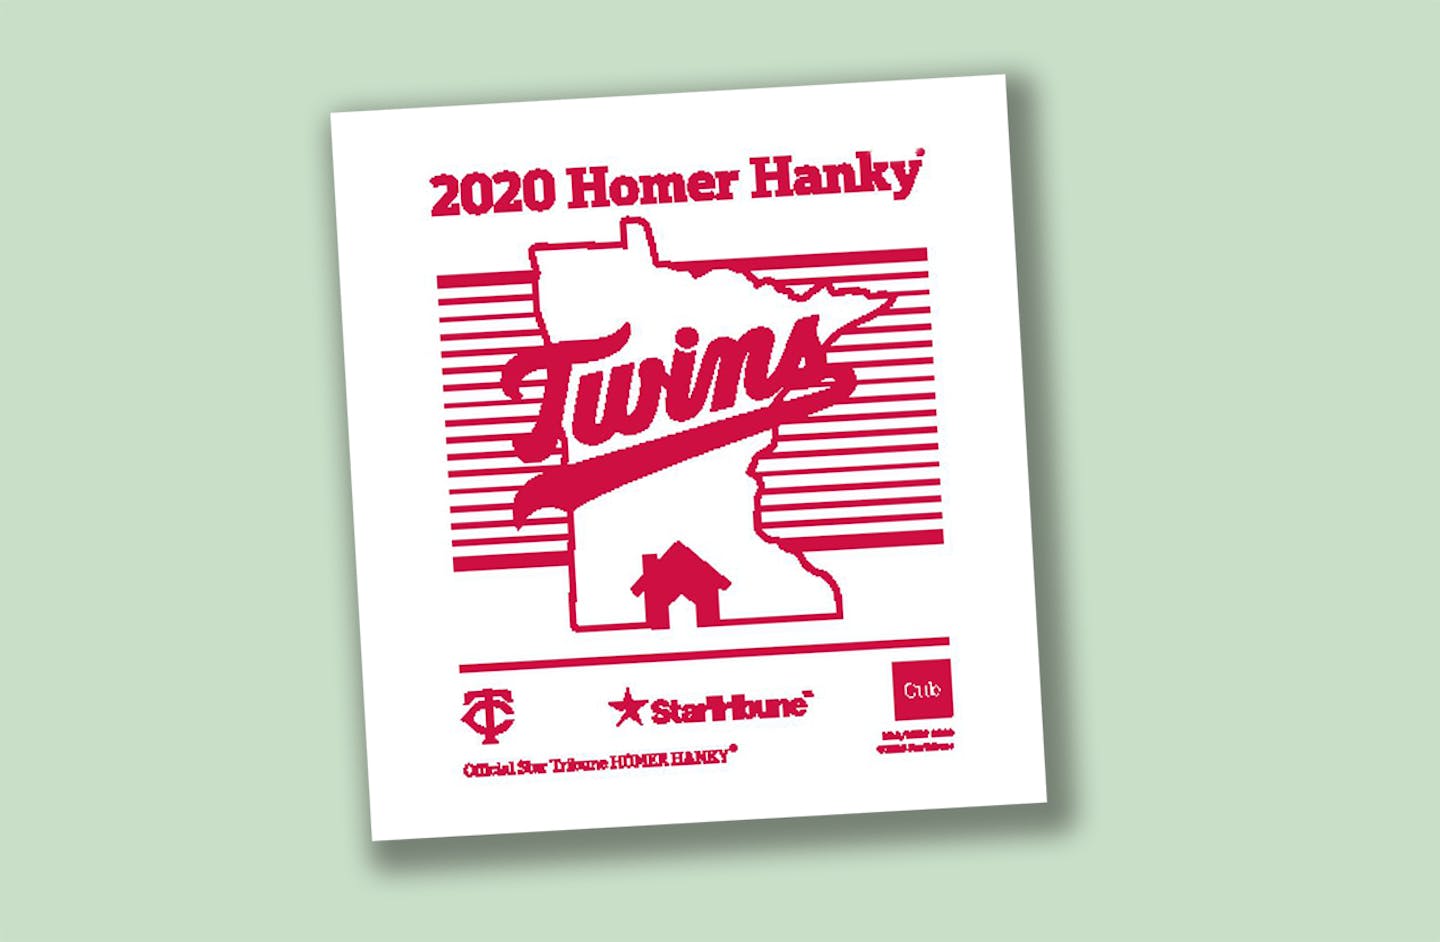 2020 Homer Hanky What it looks like, and how to get it